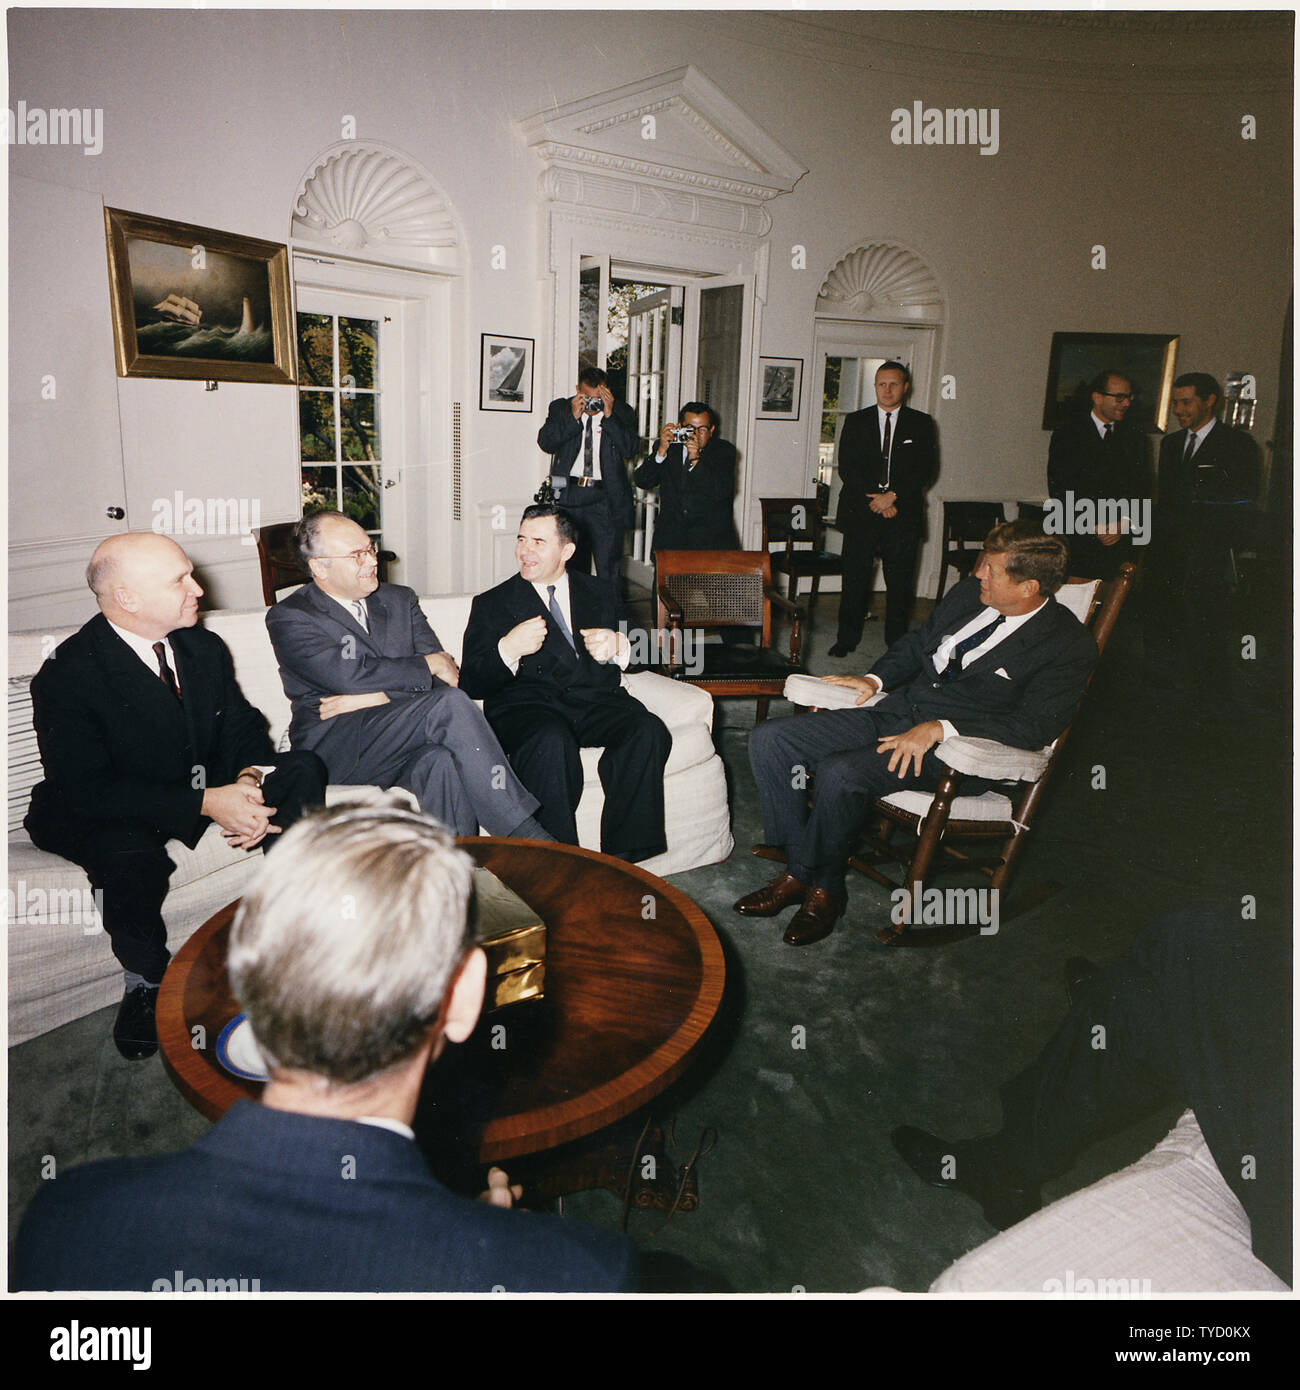 Photograph of President John F. Kennedy's Meeting with the Soviet Ambassador and Ministers at the White House; Scope and content:  Original caption: Meeting with the Soviet Minister of Foreign Affairs, Soviet Deputy Minister Vladimir S. Seyemenov, Ambassador of the USSR Anatoly F. Dobrynin, Soviet Minister of Foreign Affairs Andrel Gromyko, President Kennedy, Photographers, Aides.  White House, Oval Office. Stock Photo